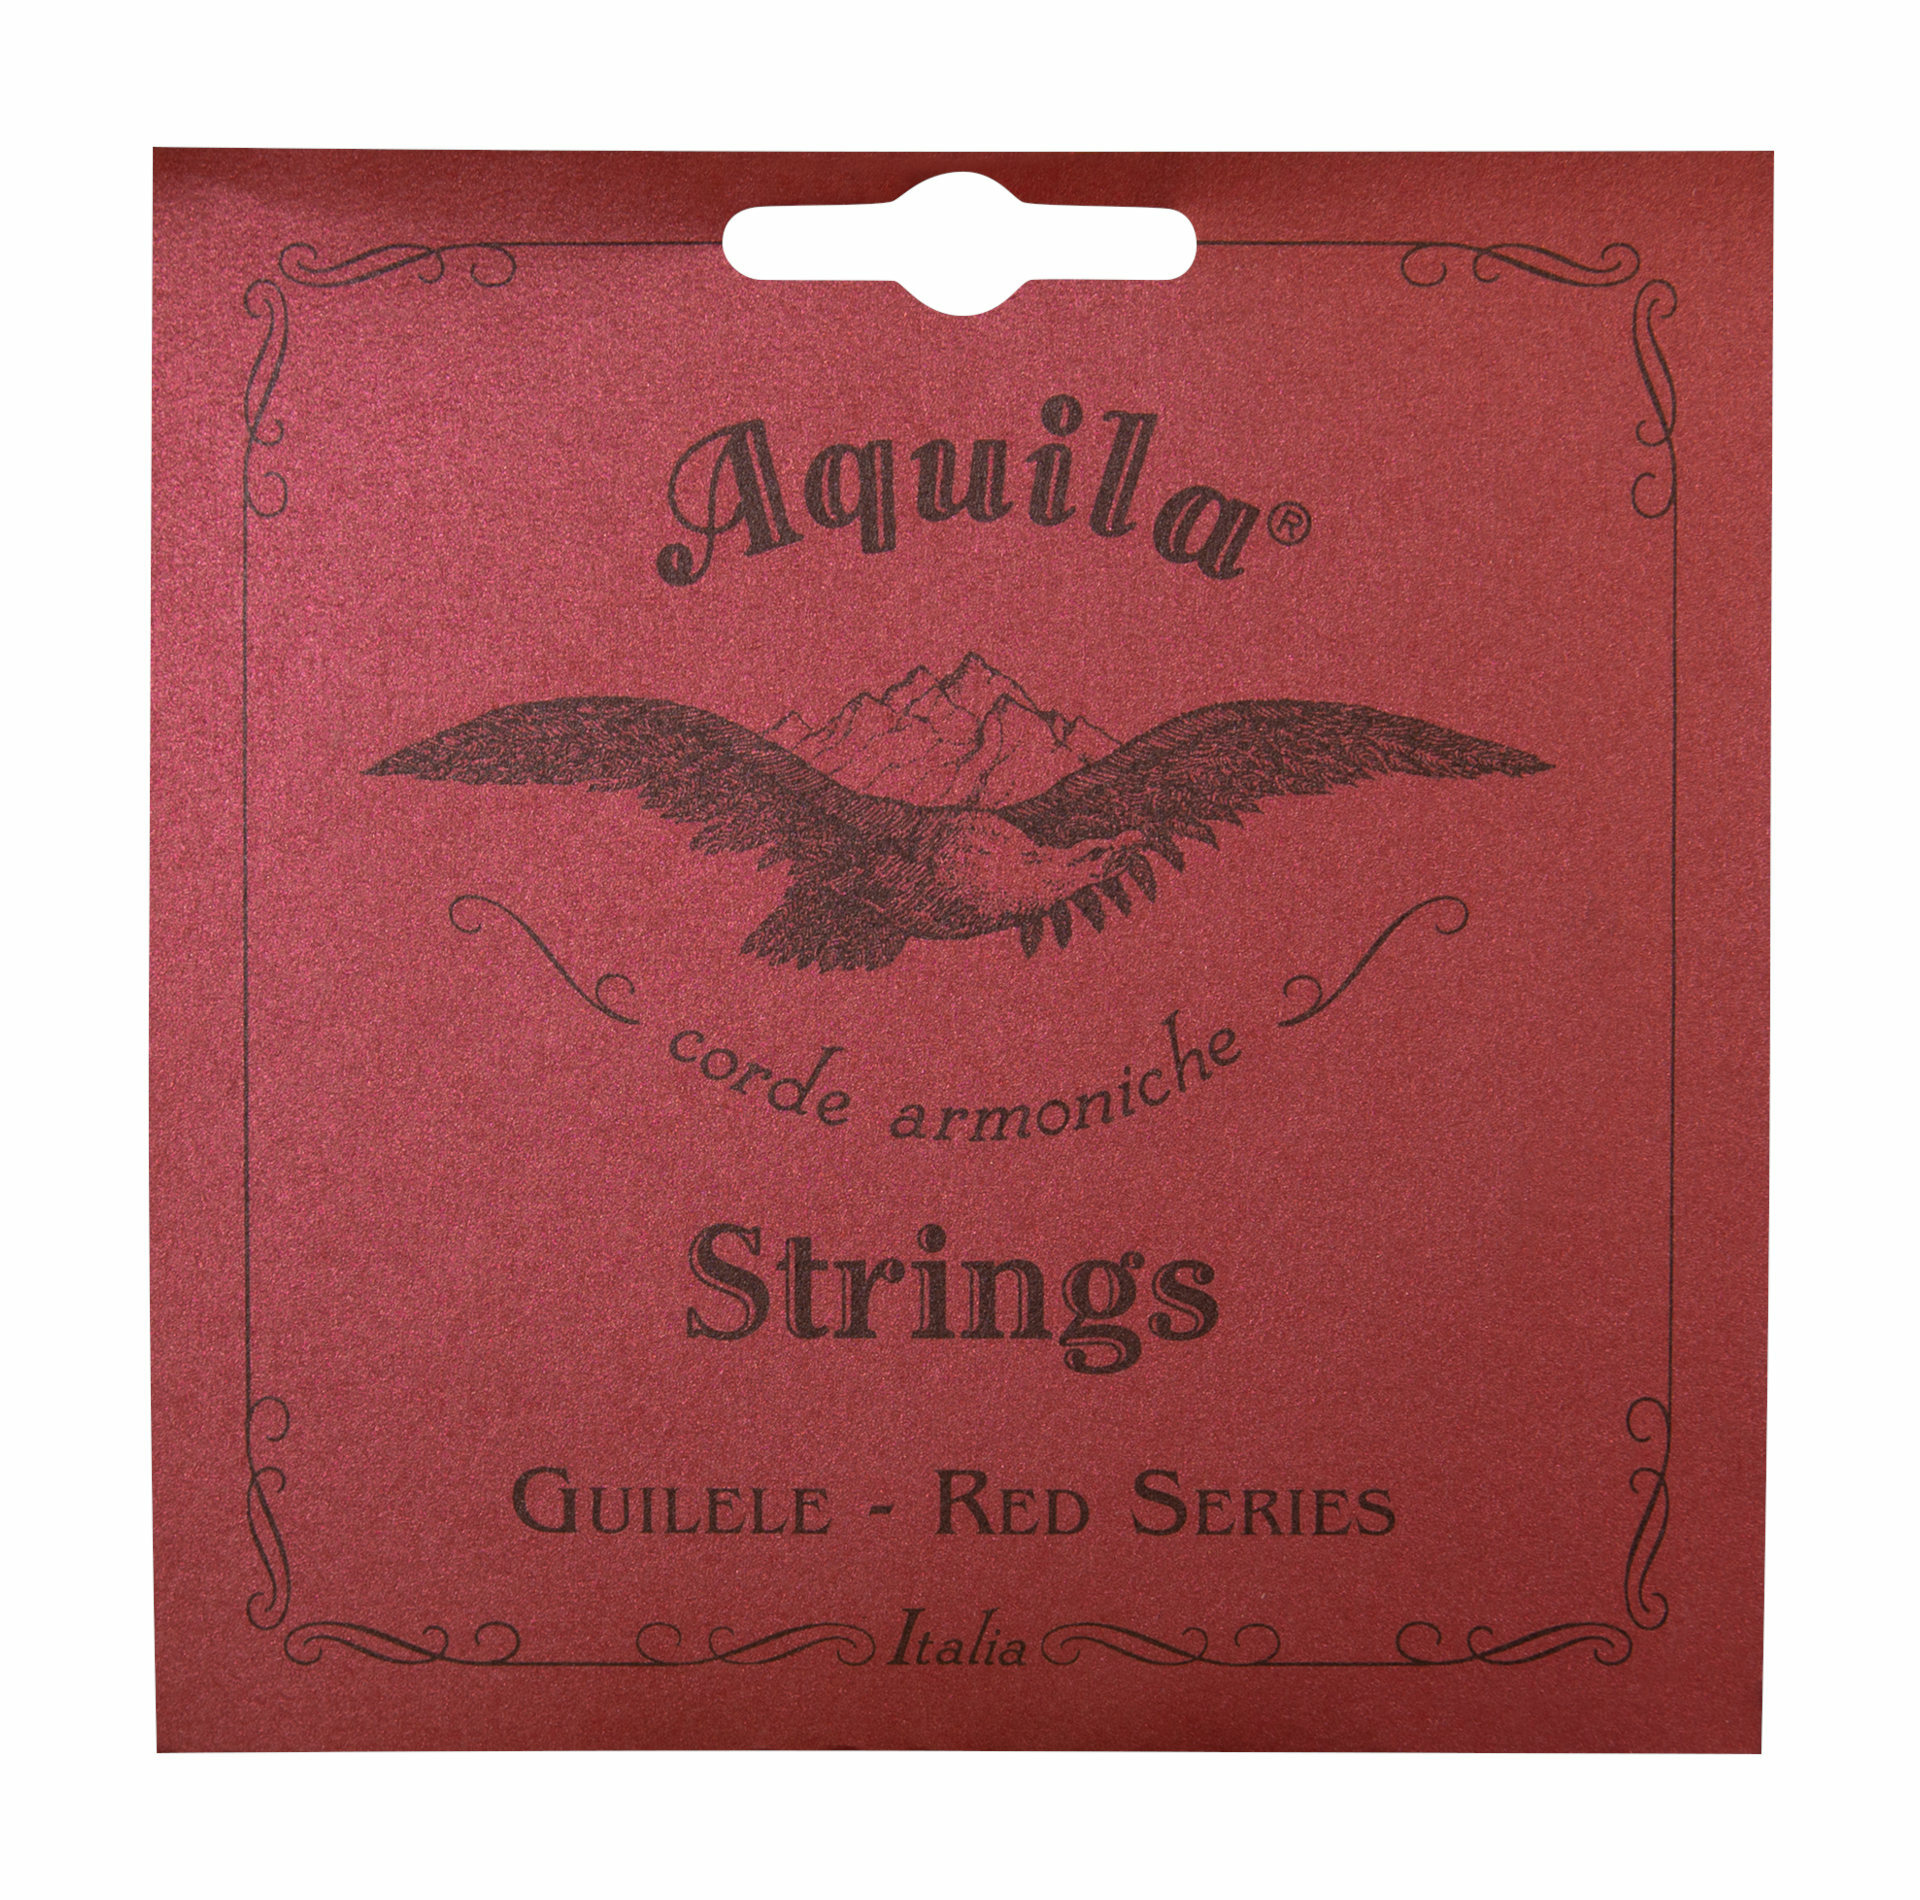 Aquila 187C - Red Series, Guitalele / Guilele String Set - E-Tuning G (3th), Wound